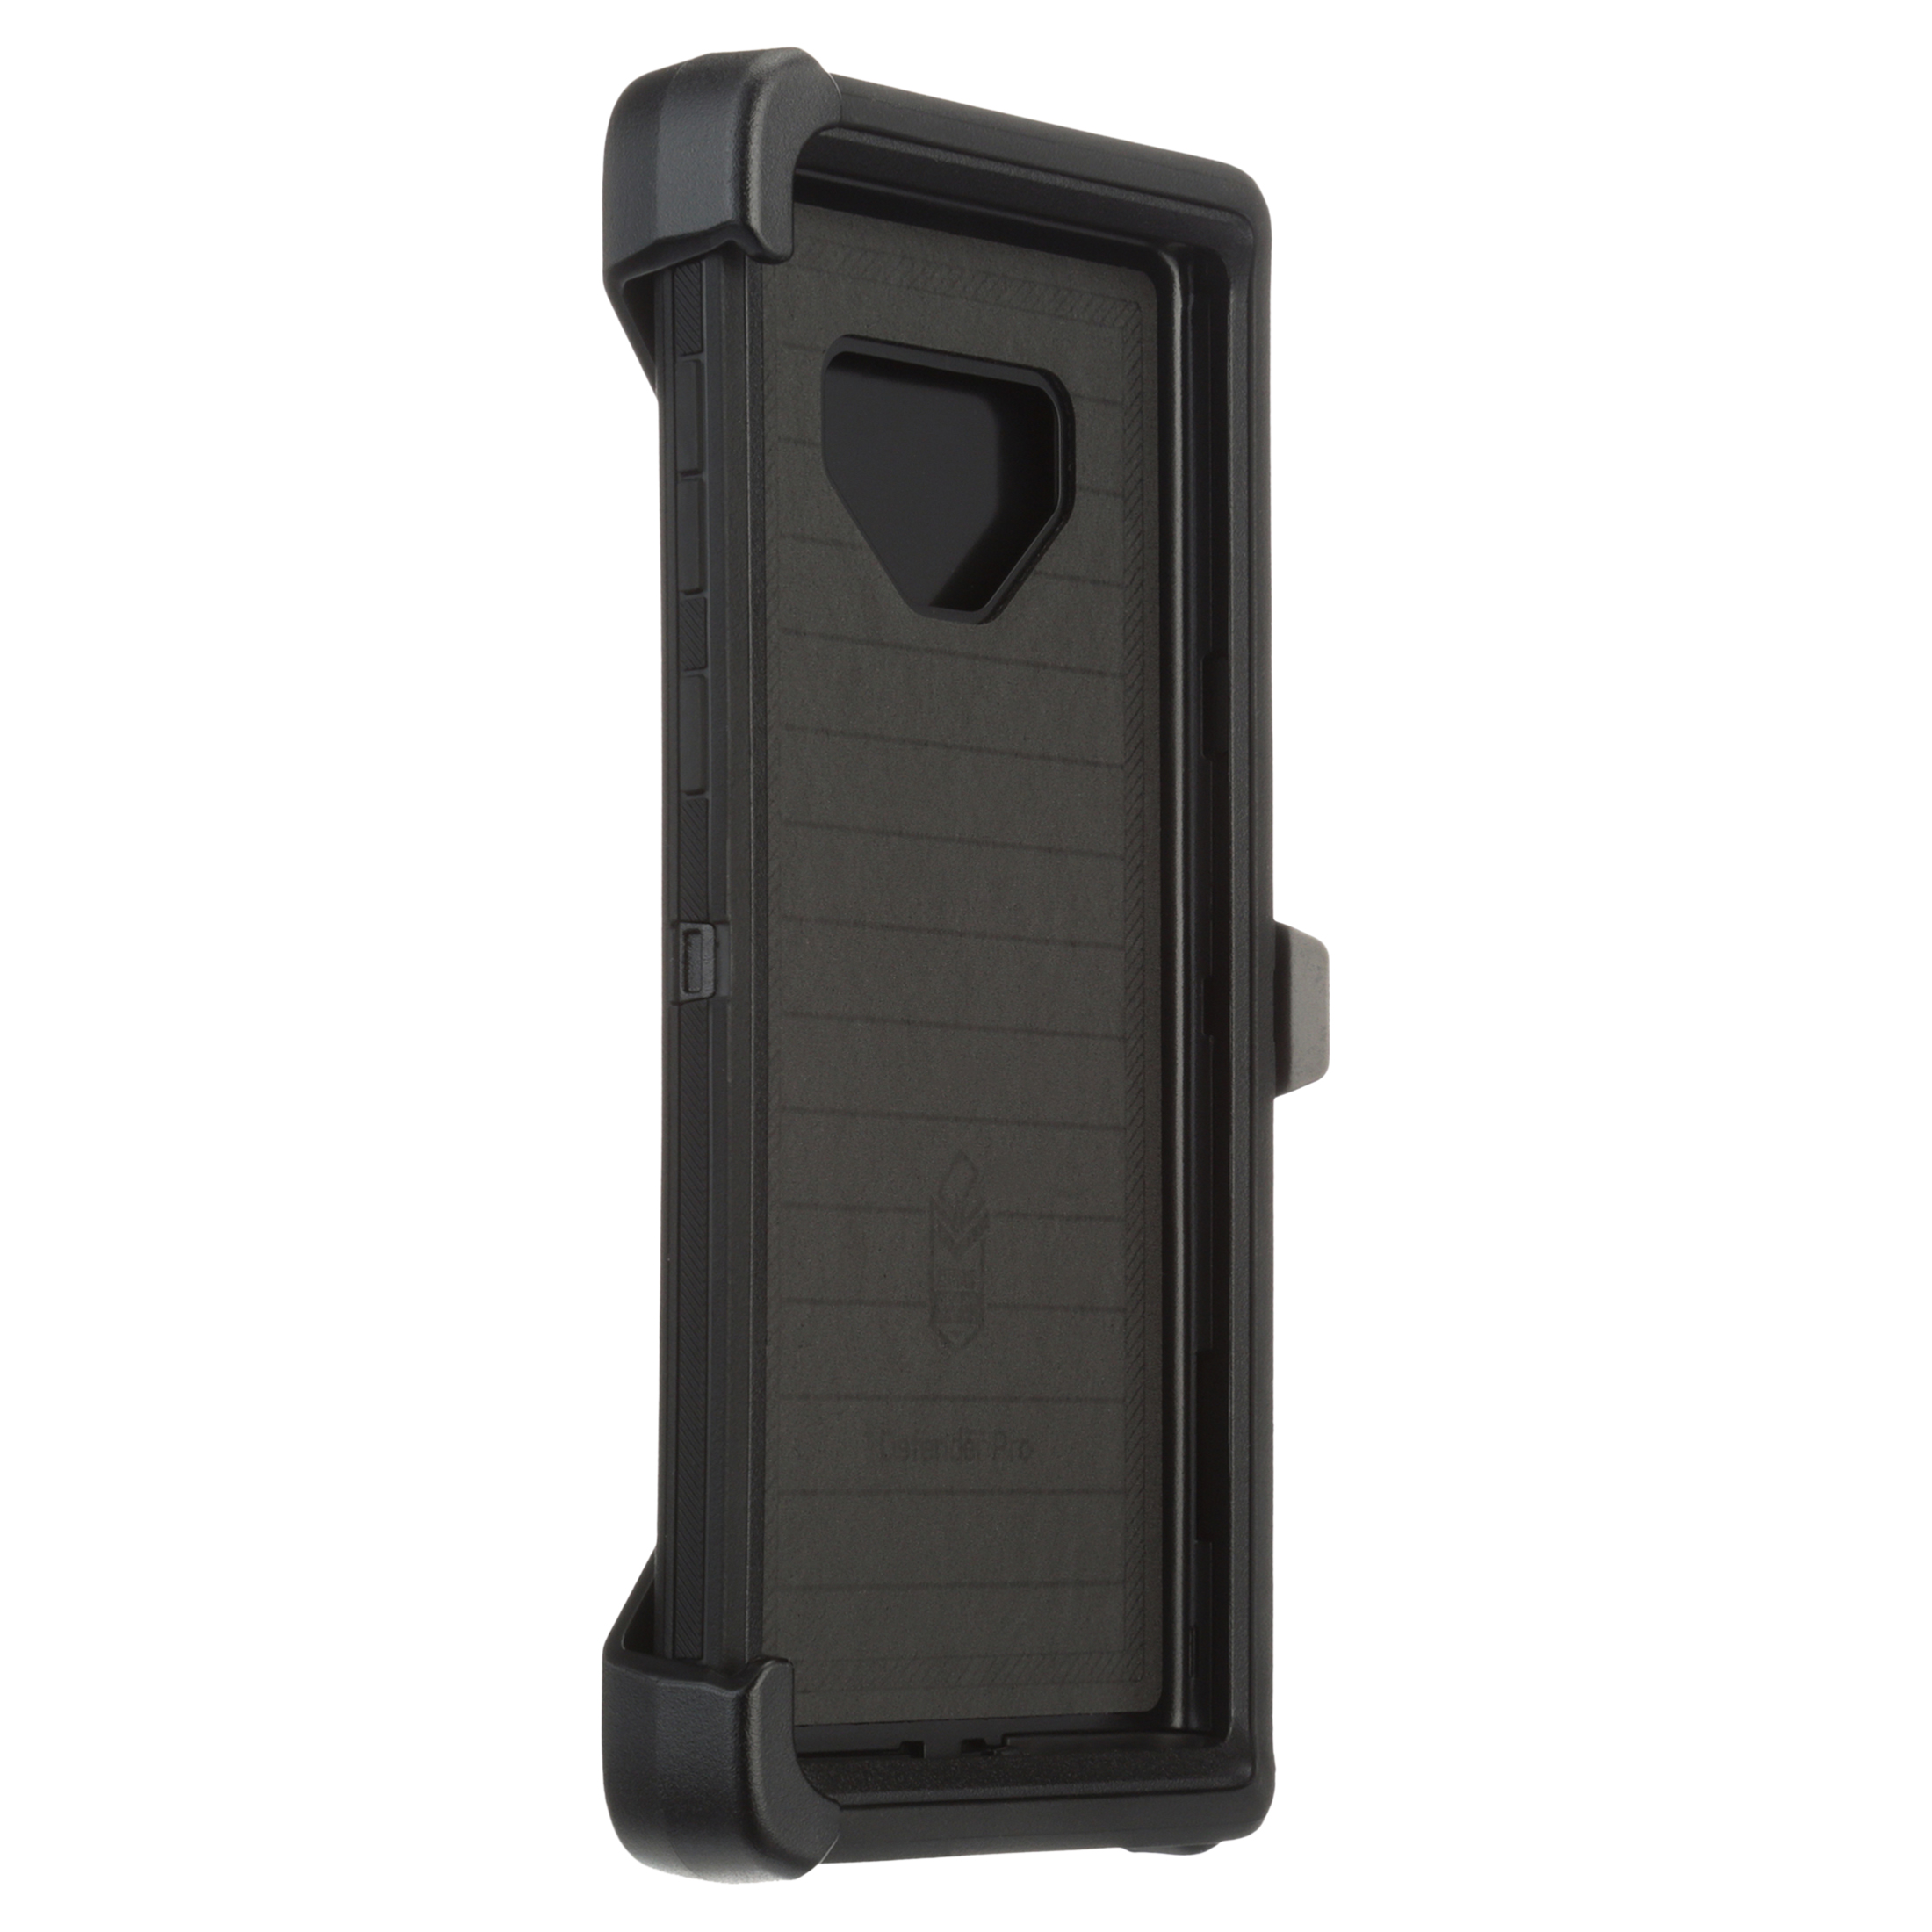 OtterBox Defender Series Pro Phone Case for Samsung Galaxy Note 9 - Black - image 3 of 10